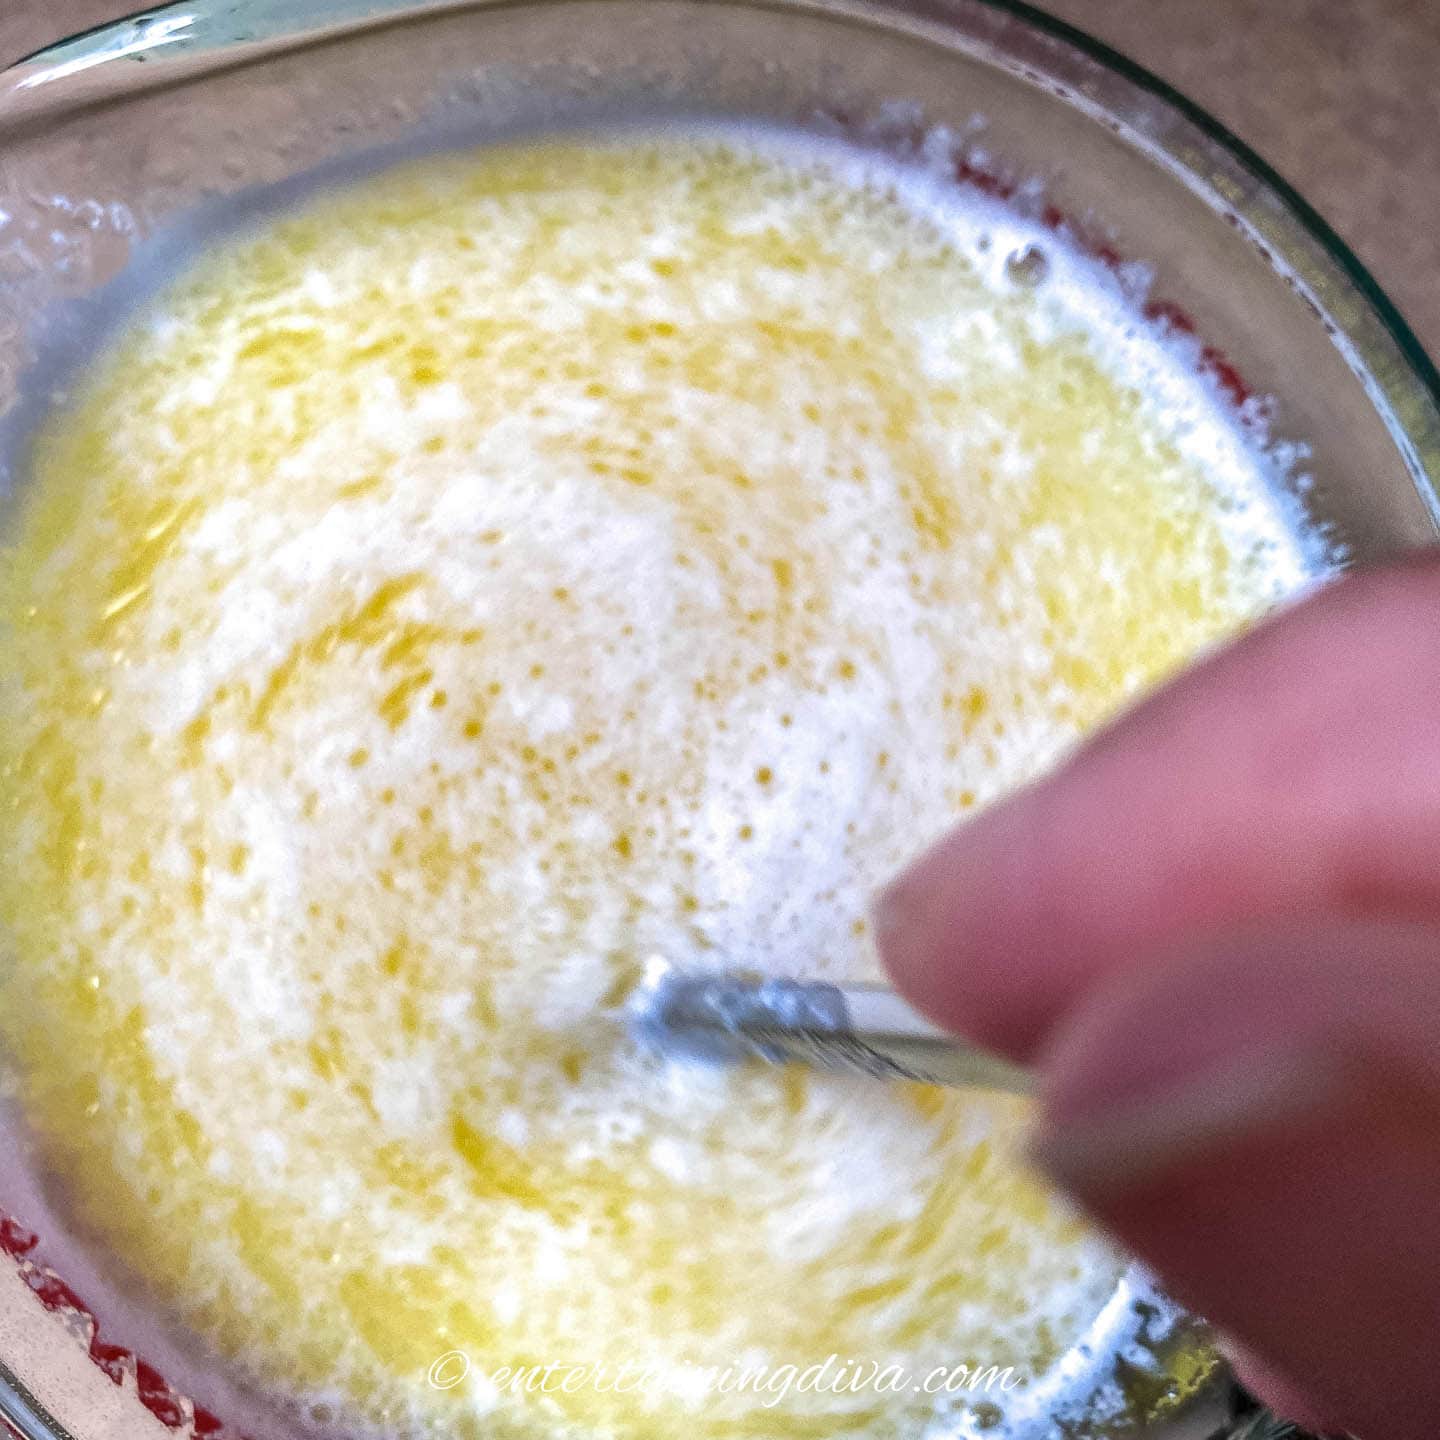 Milk, melted butter and sugar being mixed in a bowl